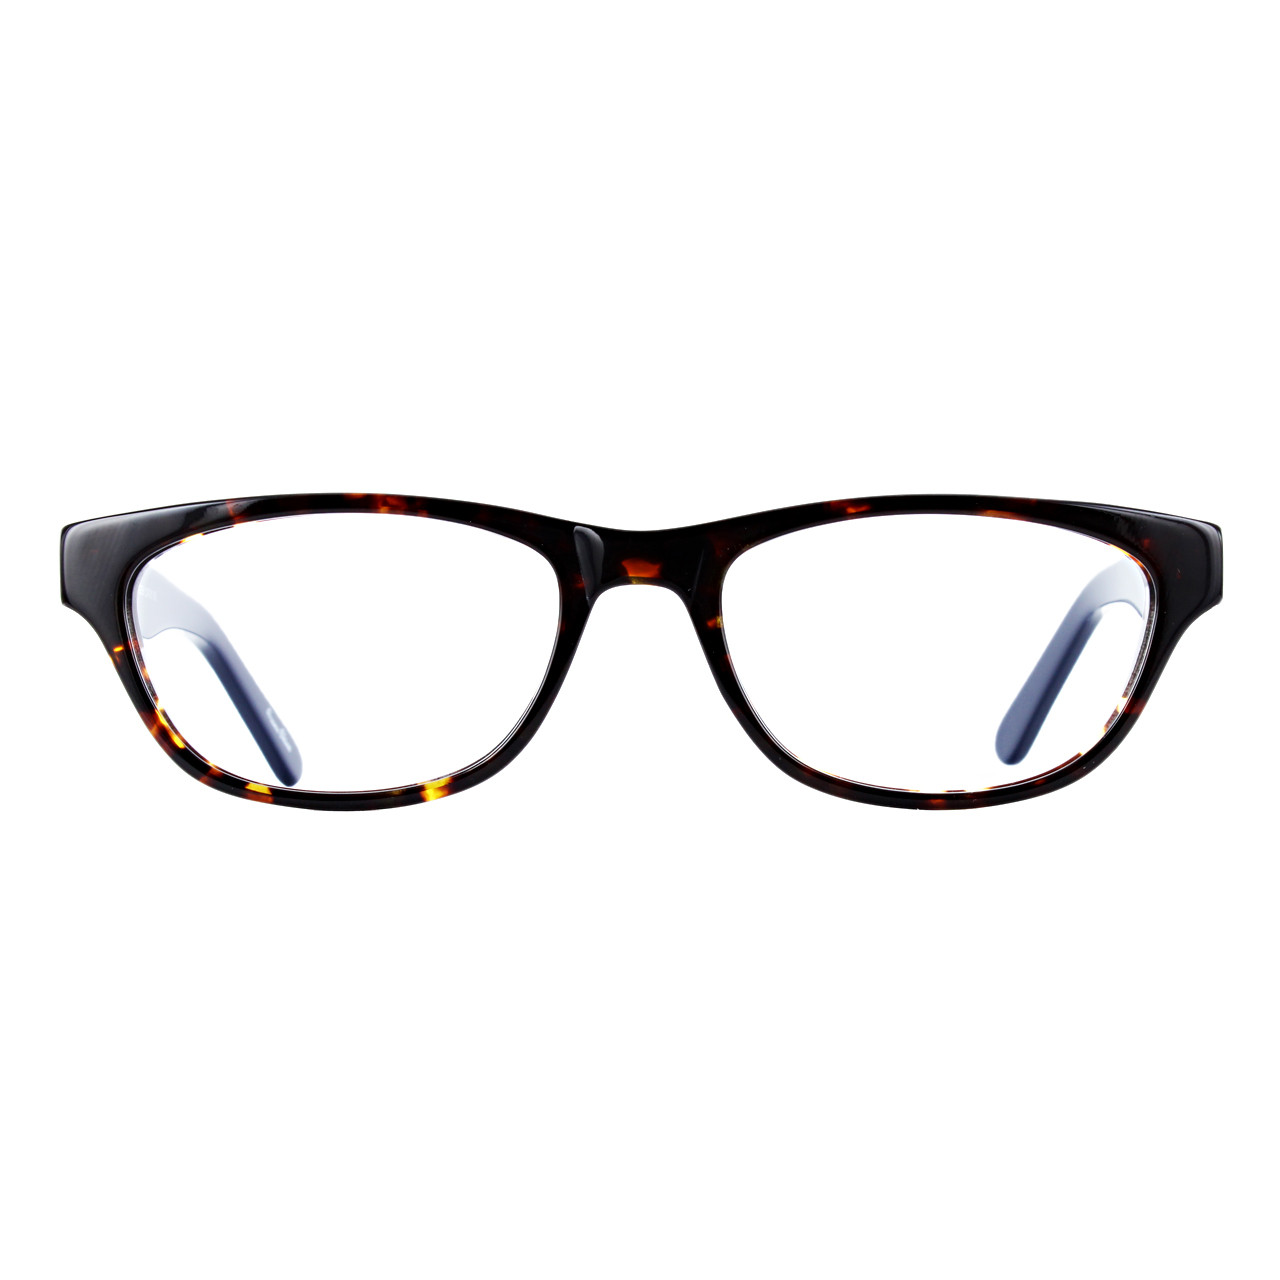 GEEK EYEWEAR ® RX Eyeglasses style CAT 01 | Cat Collection | Affordable ...